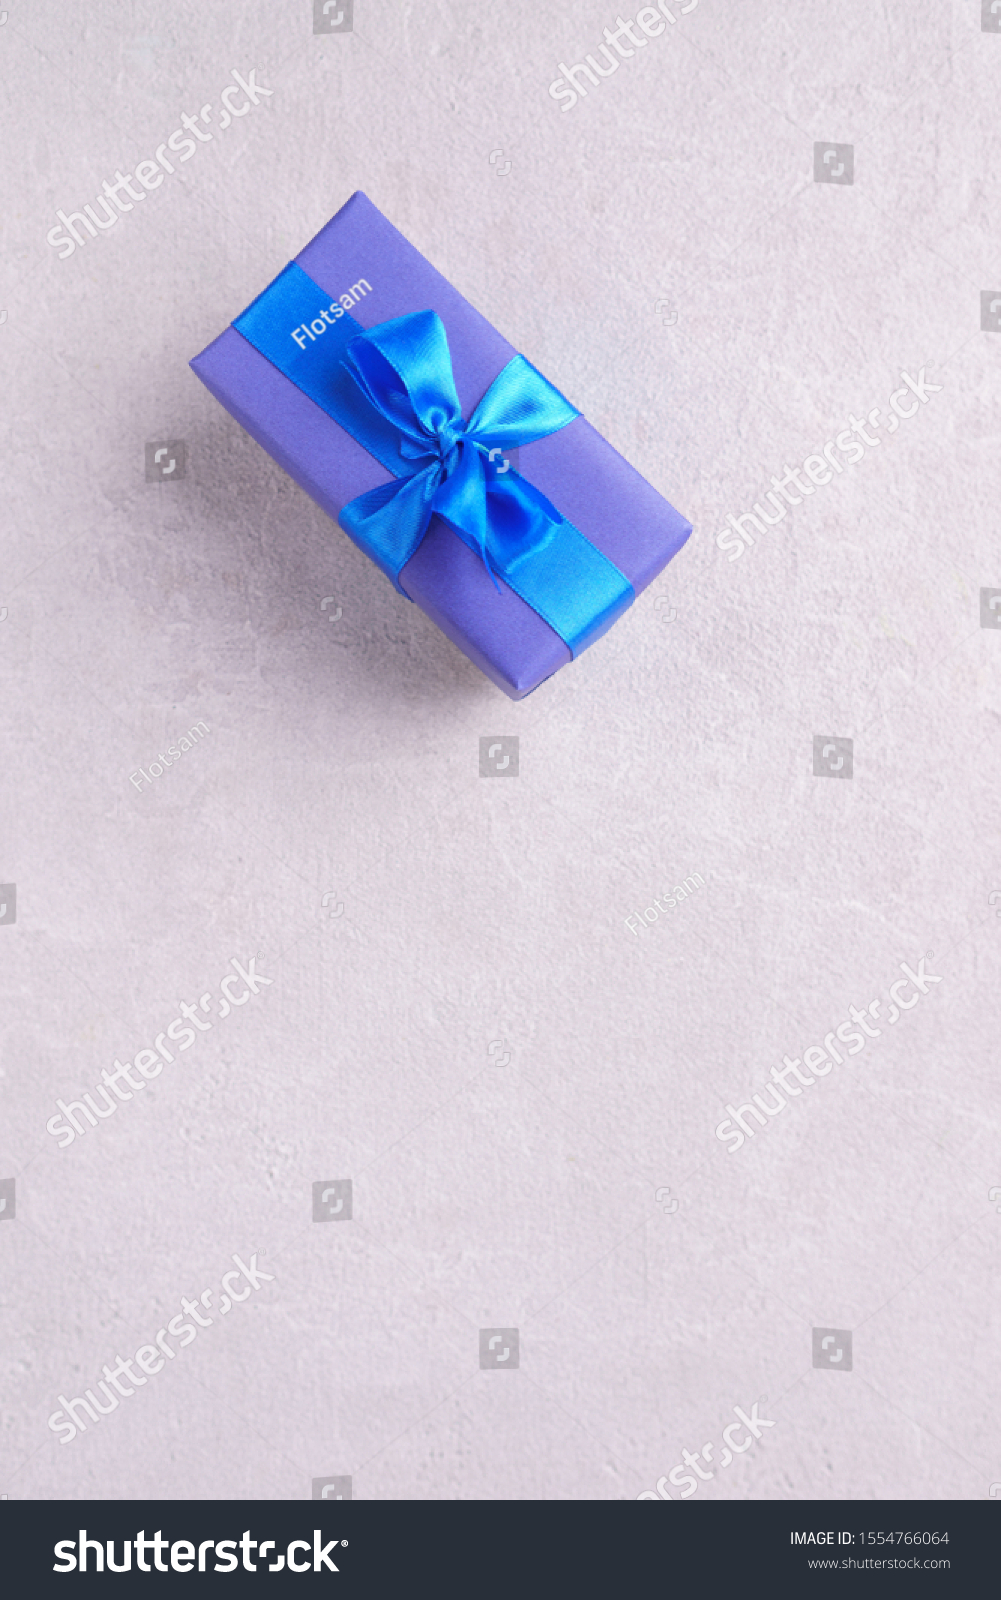 Presents background for festive season, copy space. Gift box on stone background. Reward, gift for holiday or birthday, festivity or greeting concept #1554766064